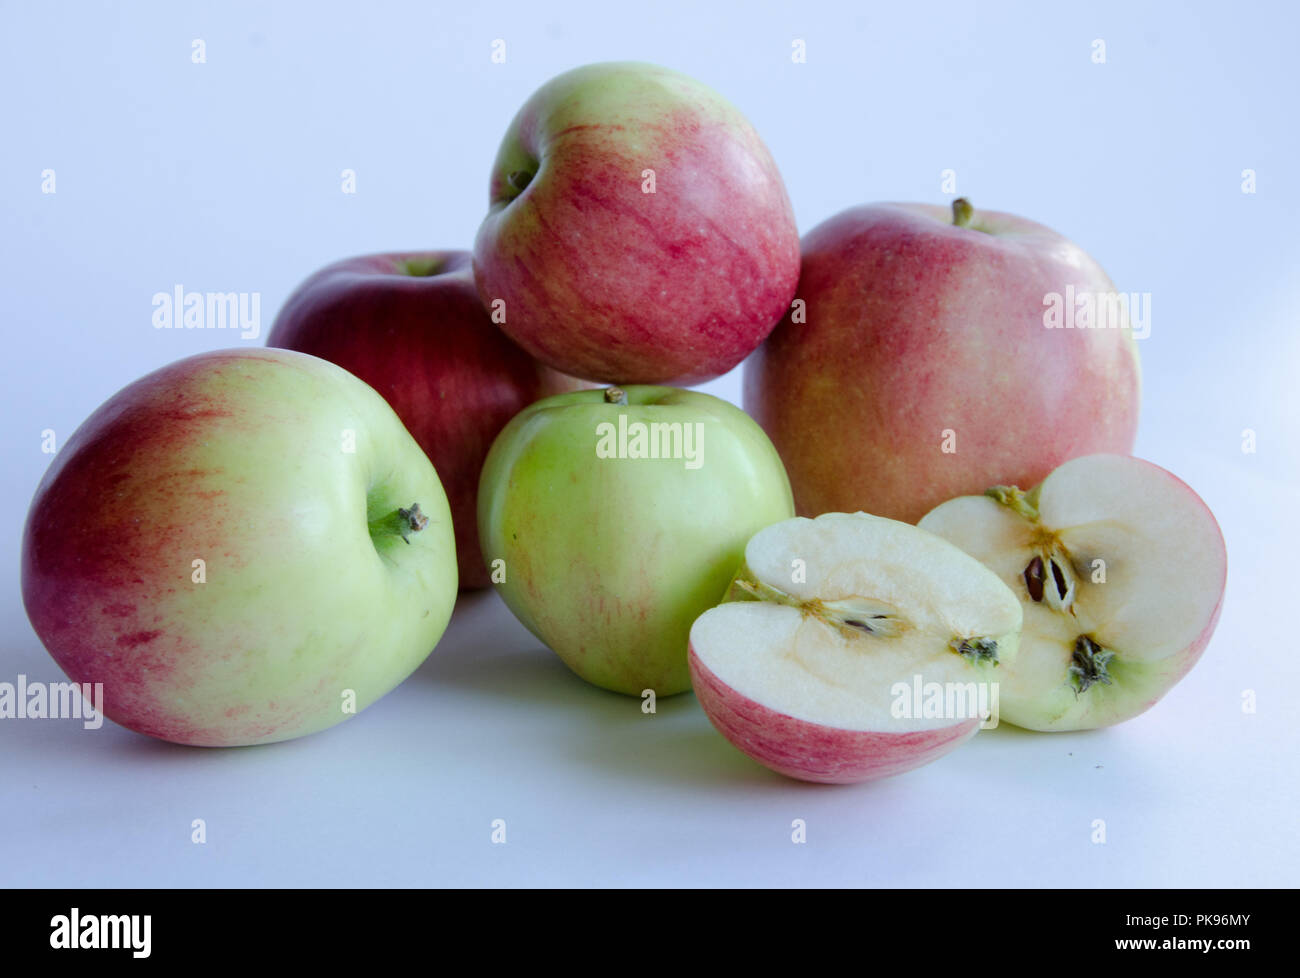 Apples in group on a white background Stock Photo